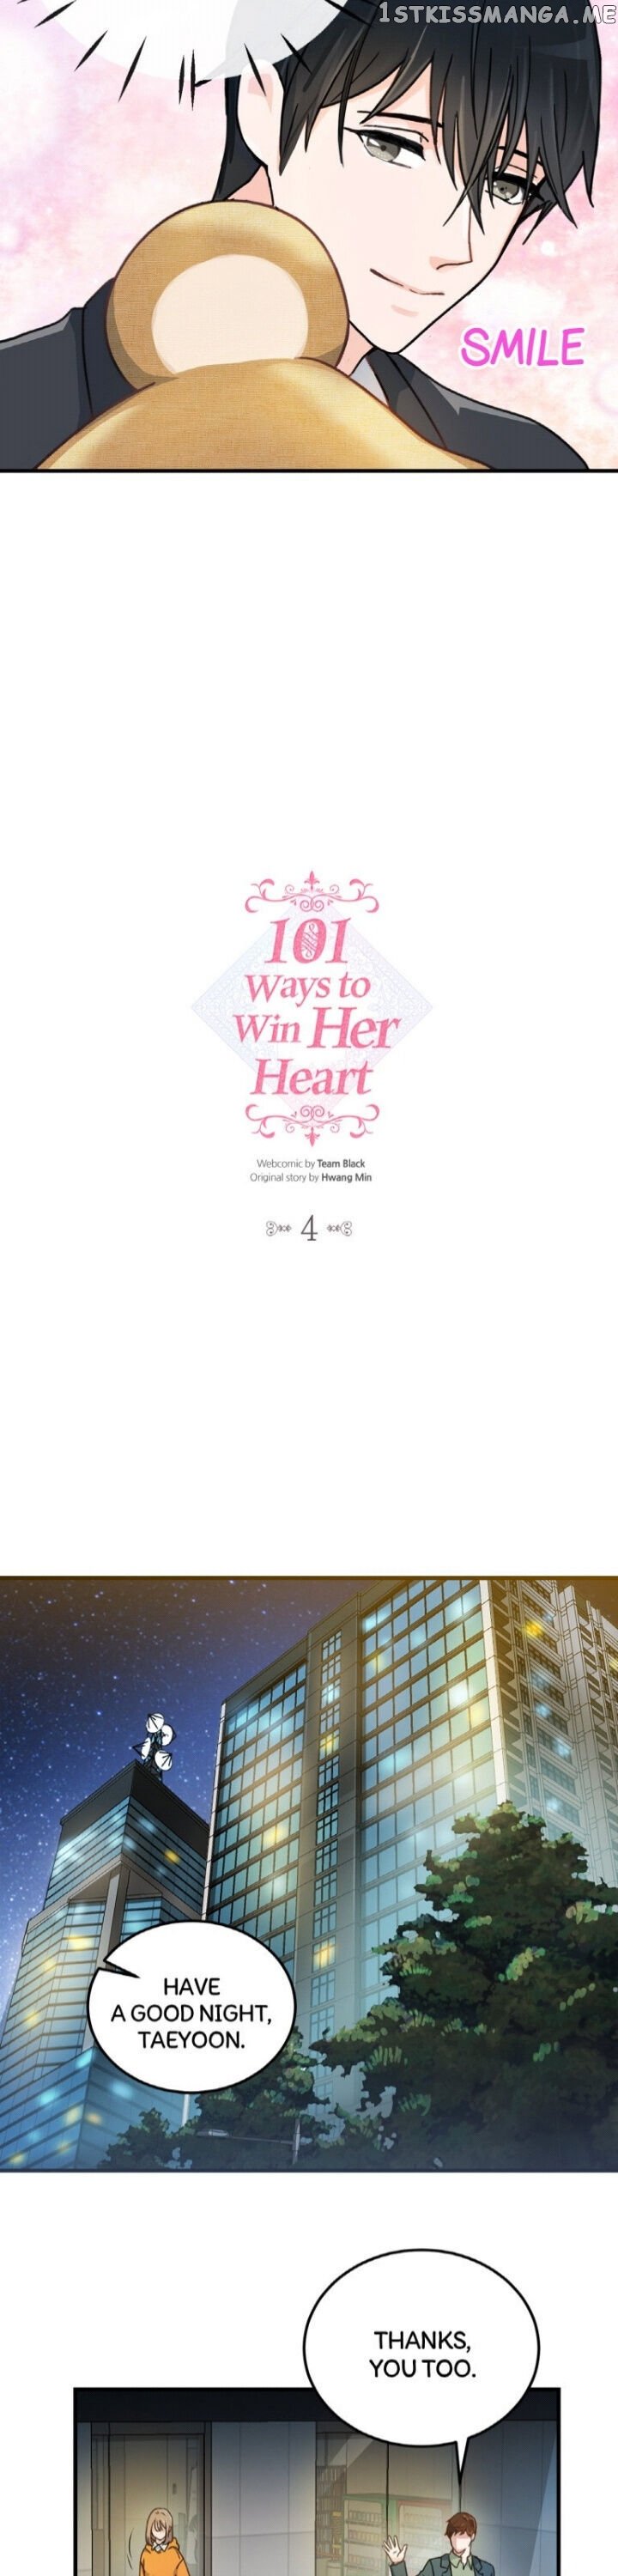 101 Ways to Win Her Heart chapter 4